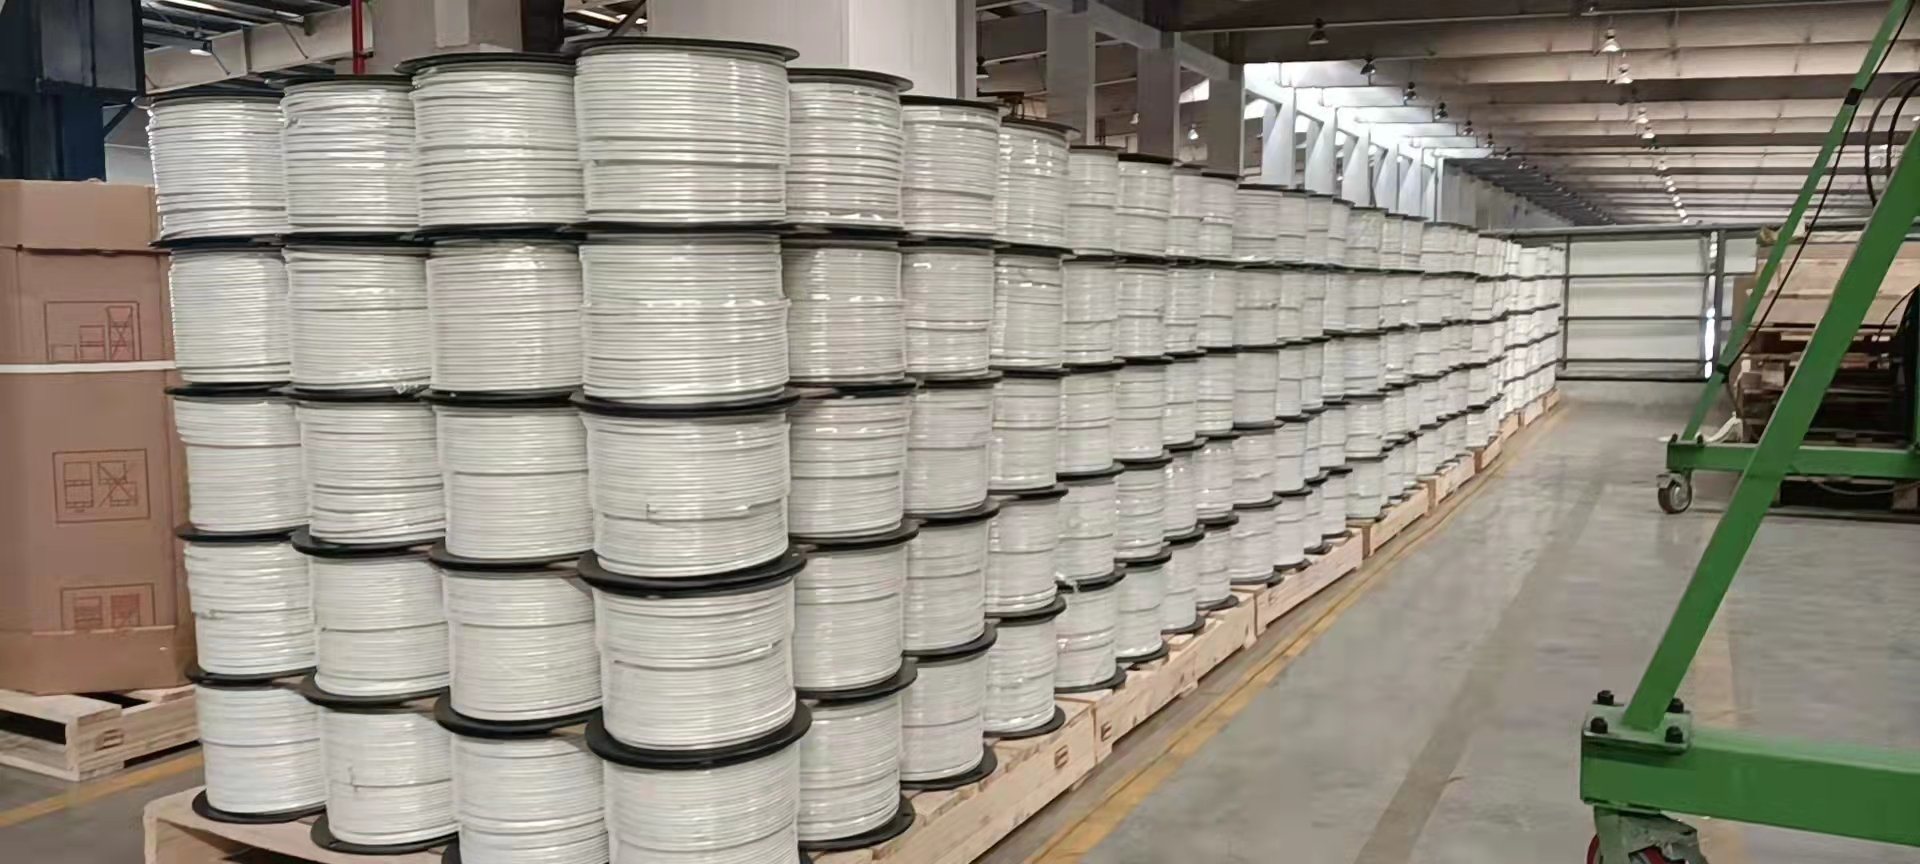 Copper PVC Nylon Bulding Housing Wire 12/2 6/3 300V Electrical Wire 10/3 cUL Listed Non Metallic Sheath Wire LV Power Cable